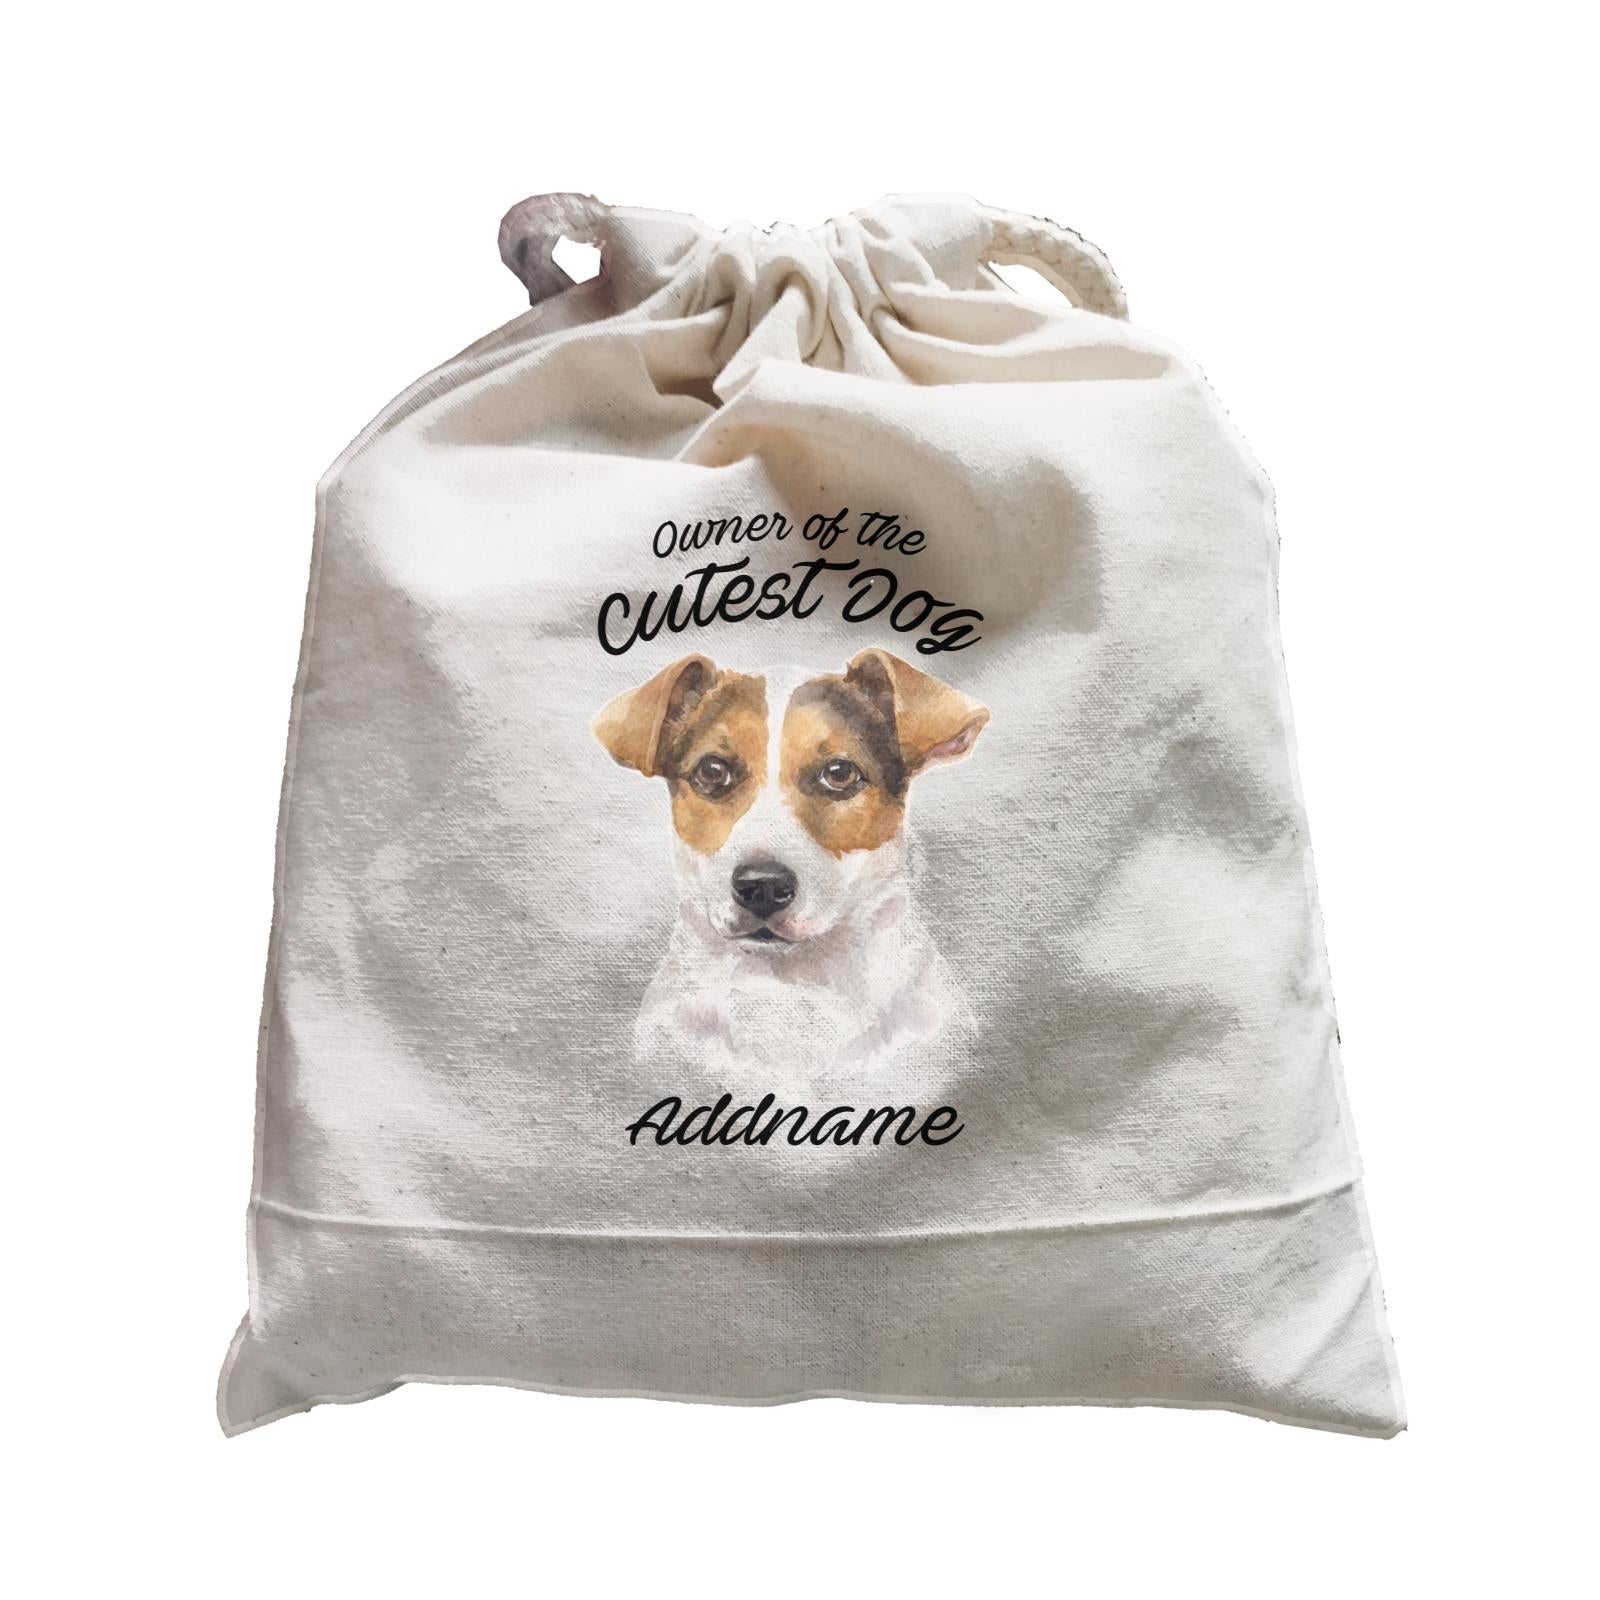 Watercolor Dog Owner Of The Cutest Dog Jack Russell Short Hair Addname Satchel